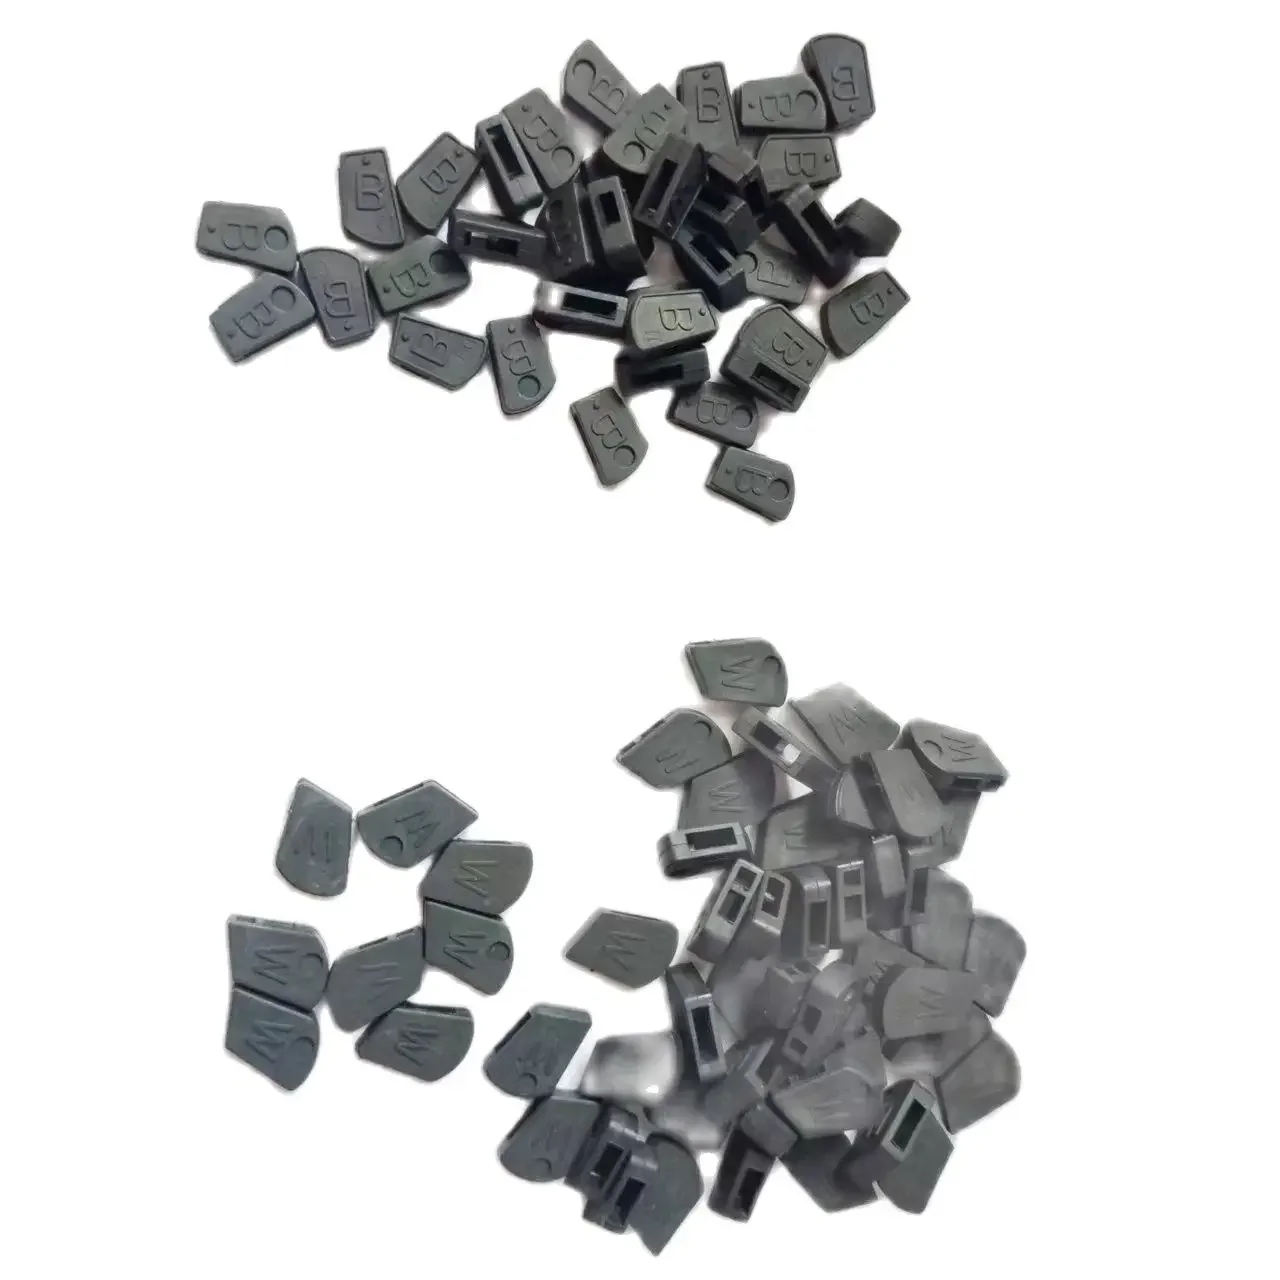 

88pcs Casio Replacement Hammer Rubber Caps For Privia PX130 PX150 PX3 PX5 AP6BP AP700 O AP710BK CDP100 CDP120